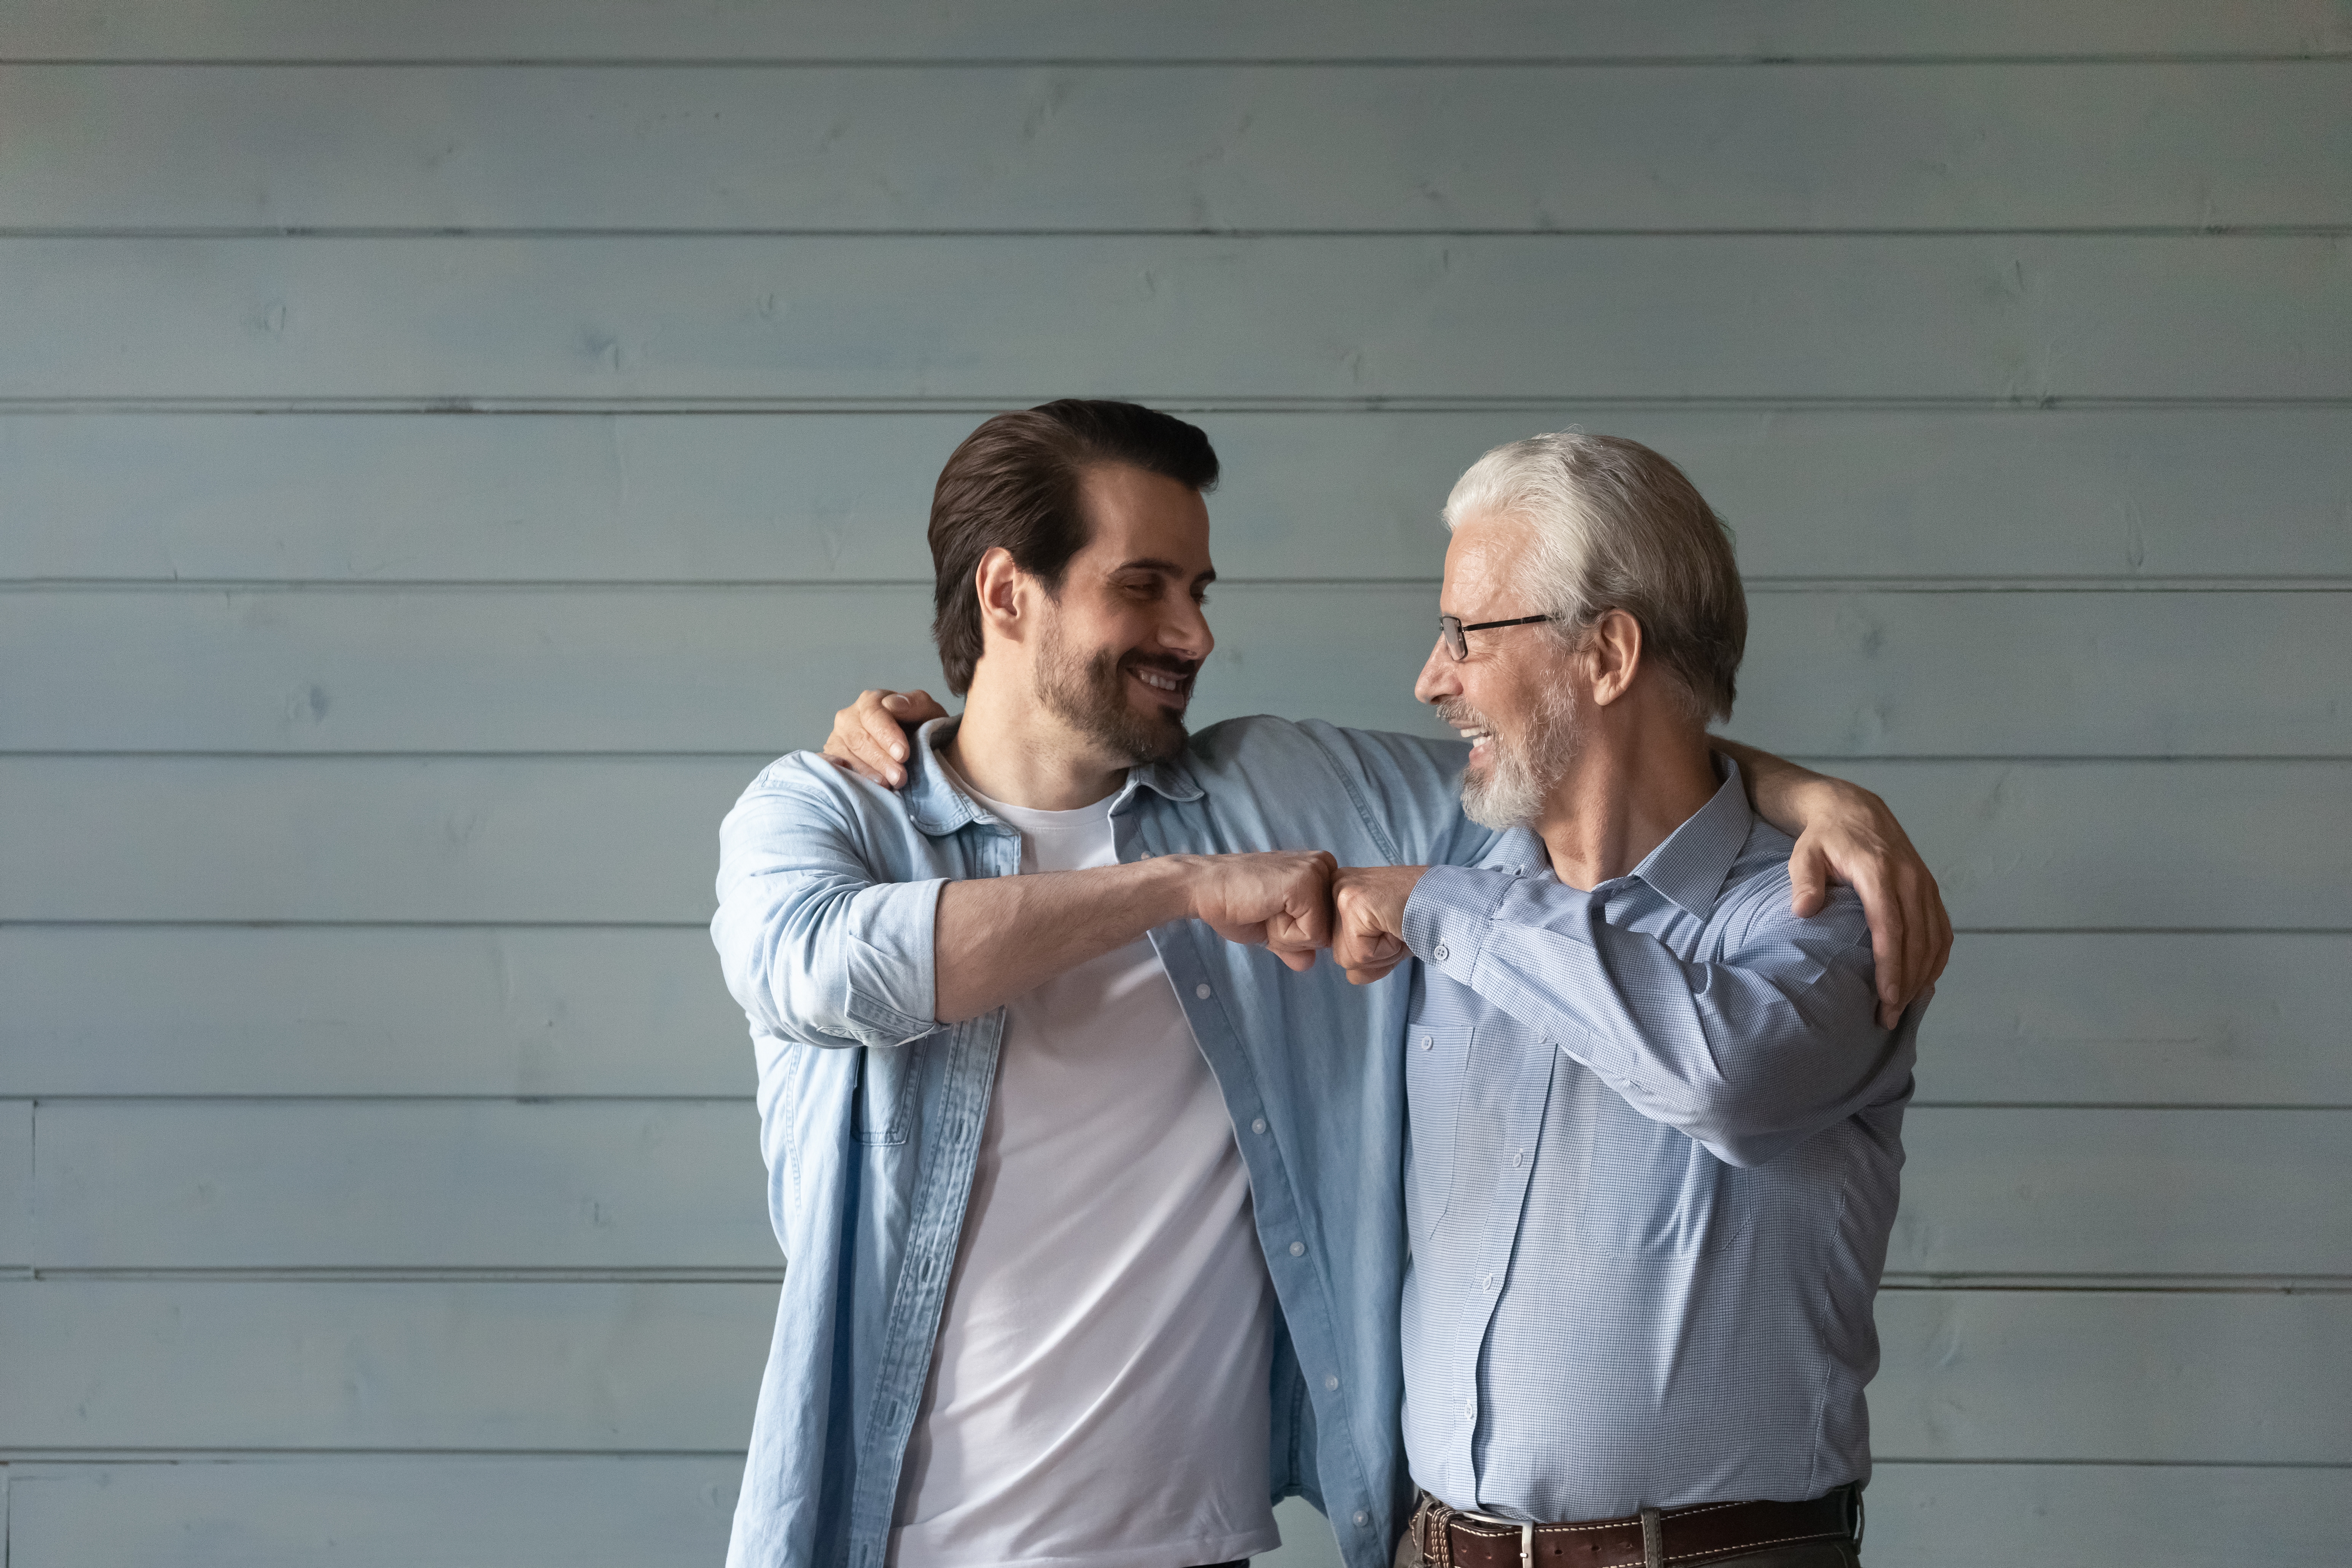 An older man bumping his fist with a younger man | Source: Shutterstock